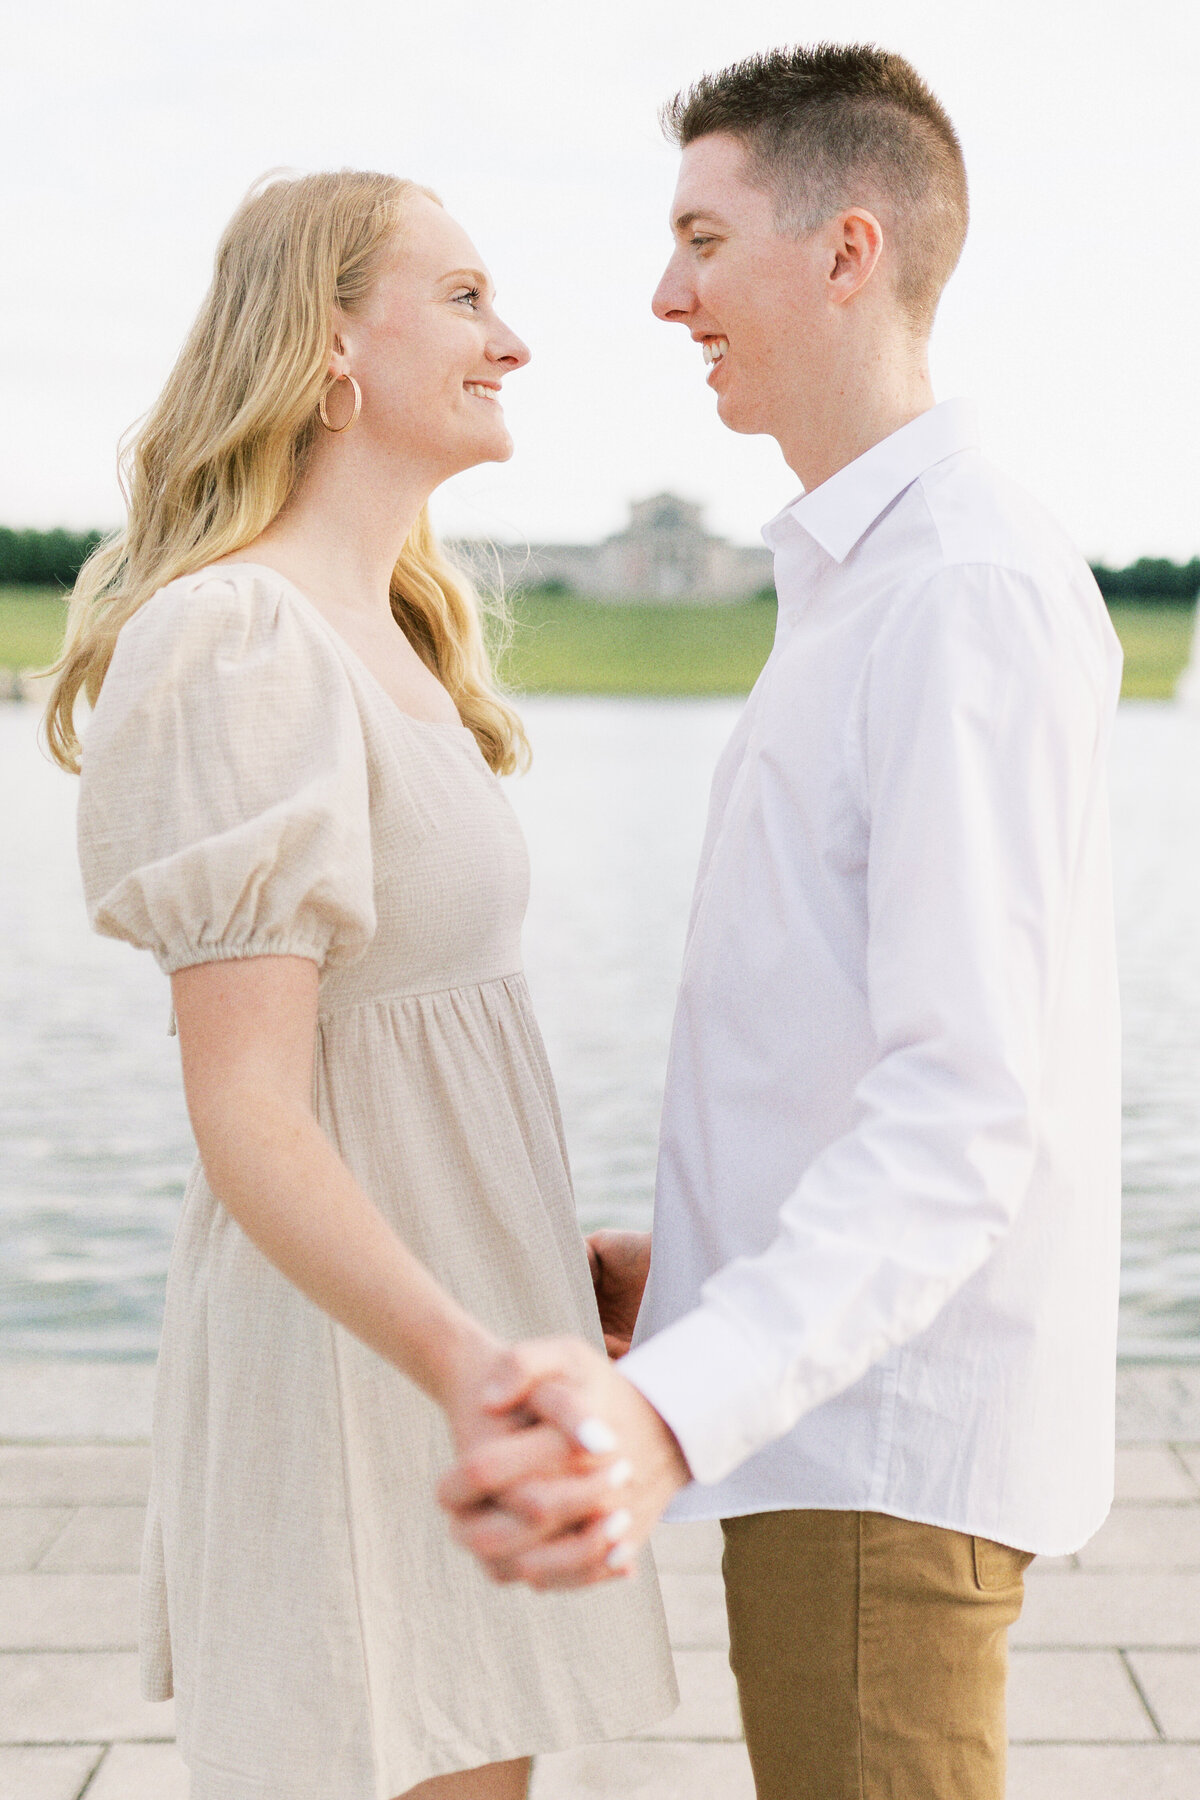 amber-rhea-photography-midwest-wedding-photographer-stl-engagement210A5112